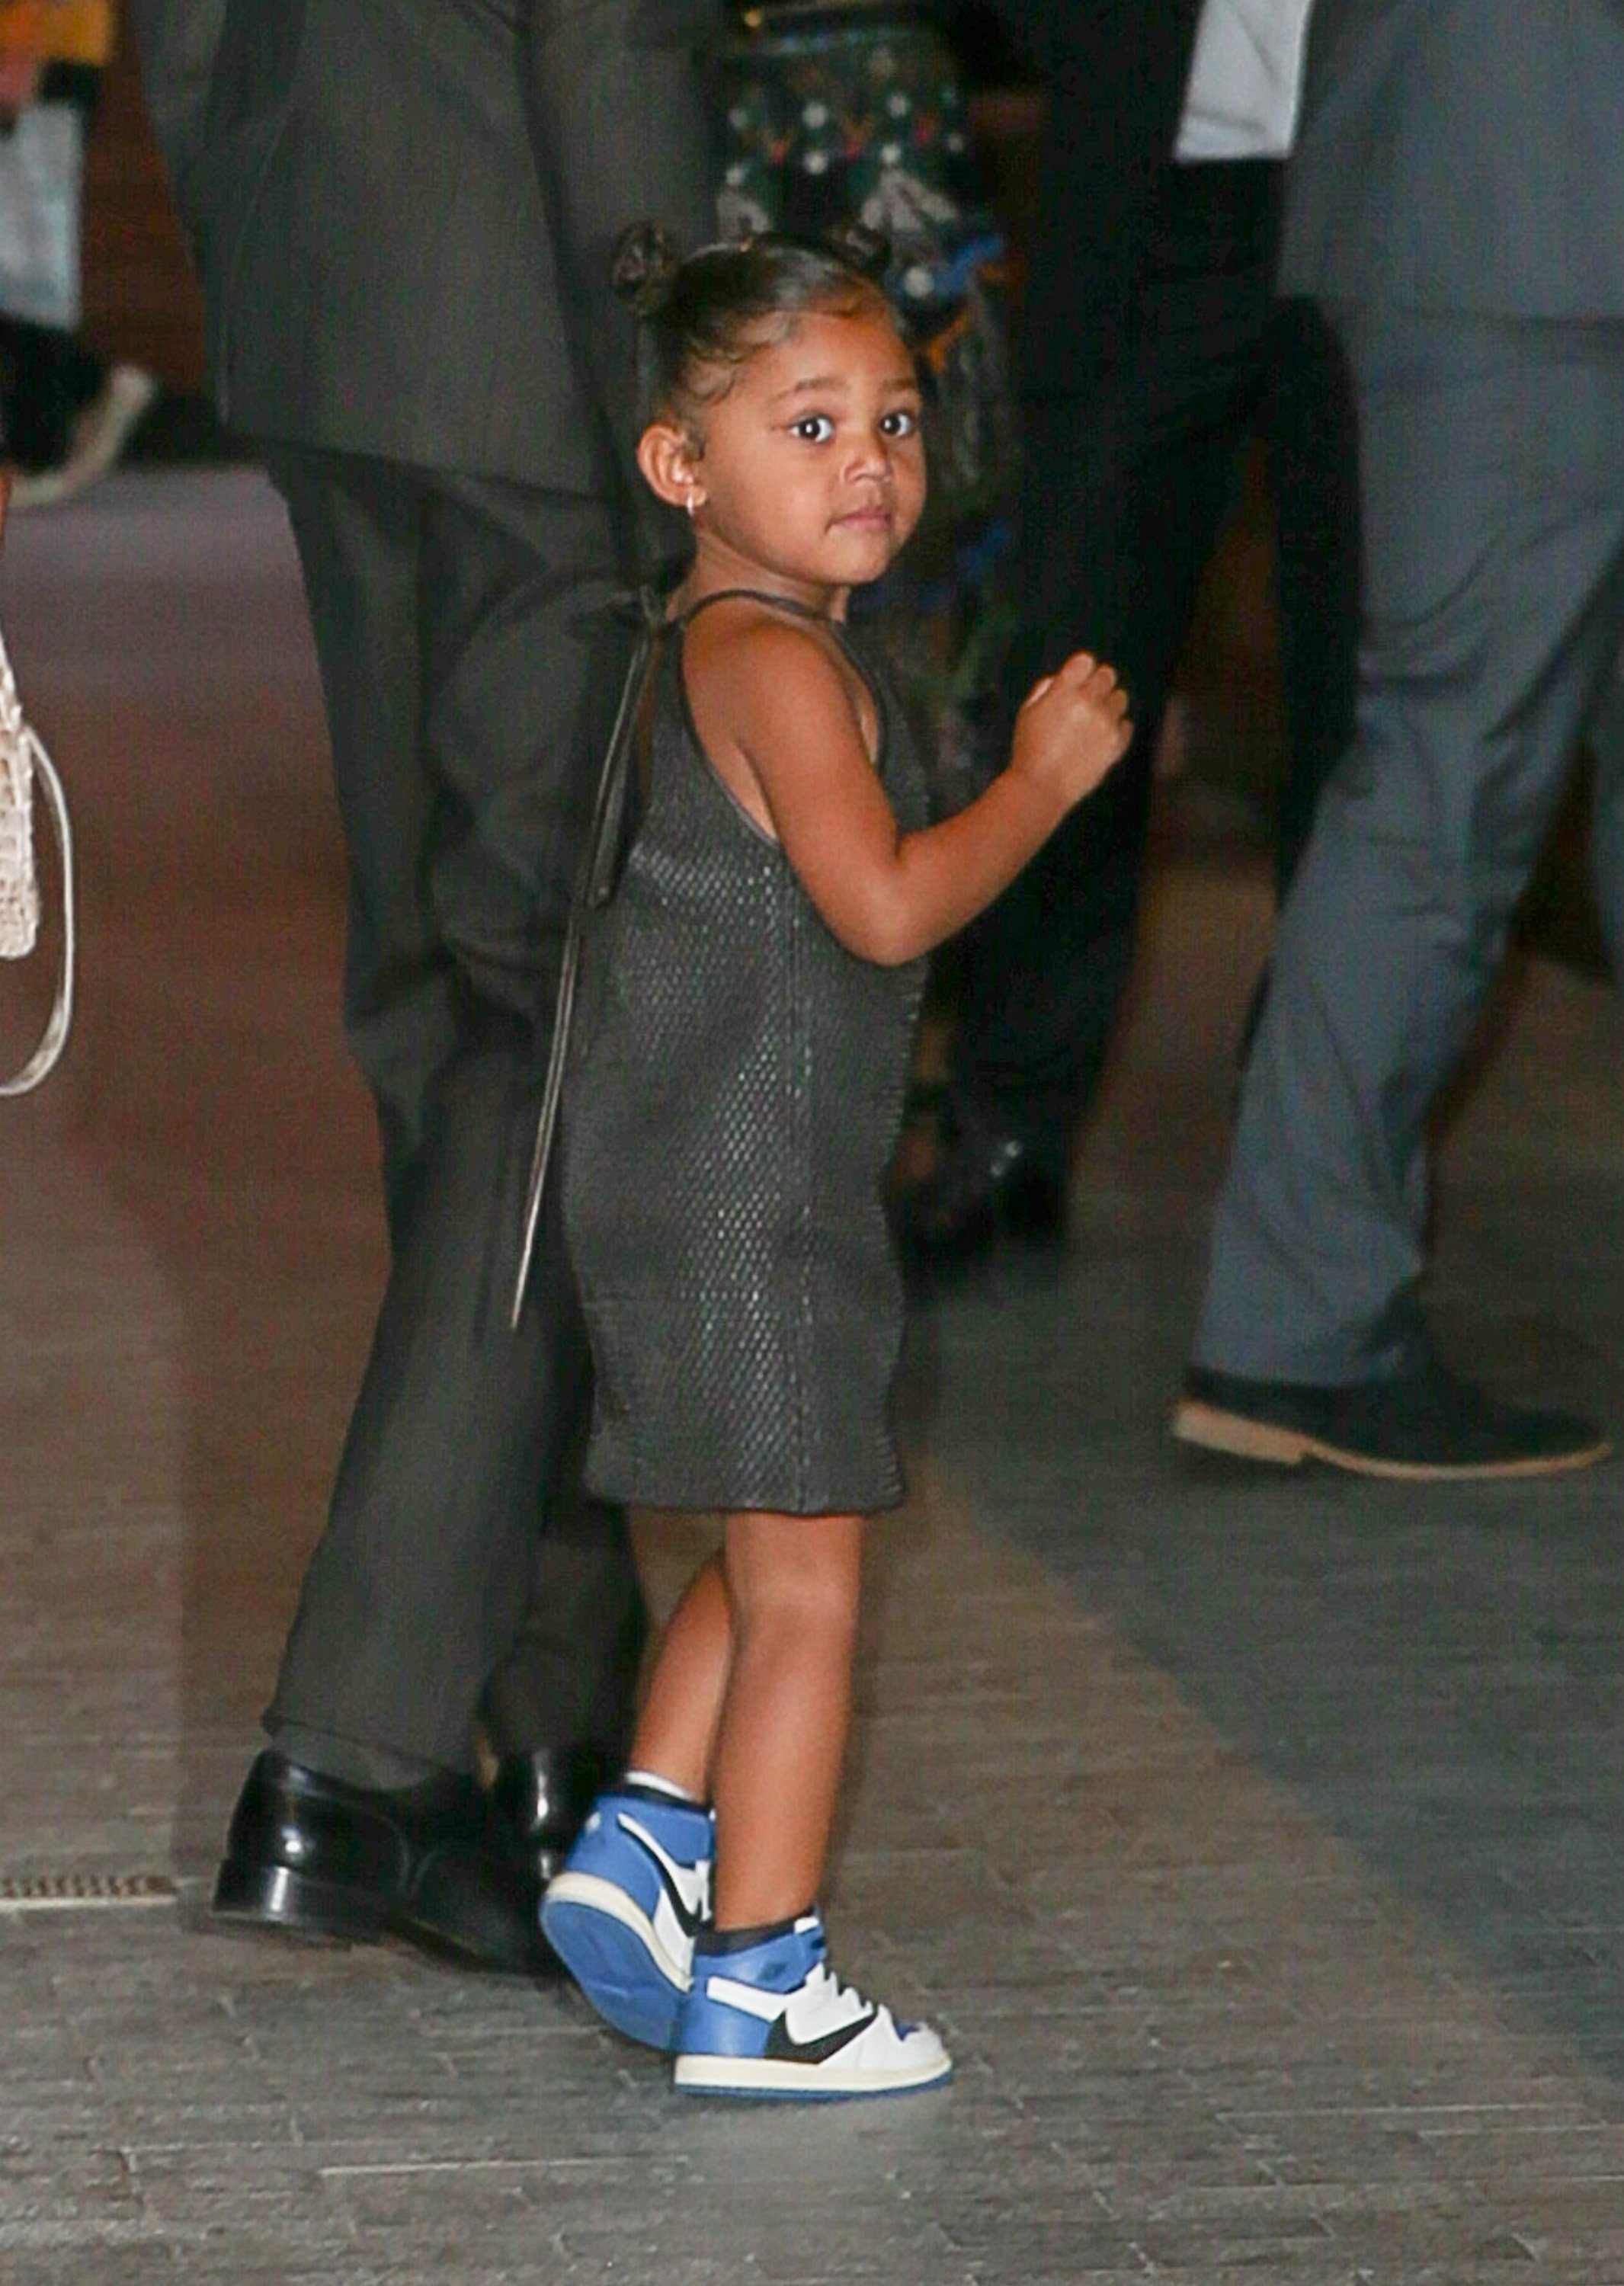 Stormi Webster is seen walking in New York with mom Kylie Jenner